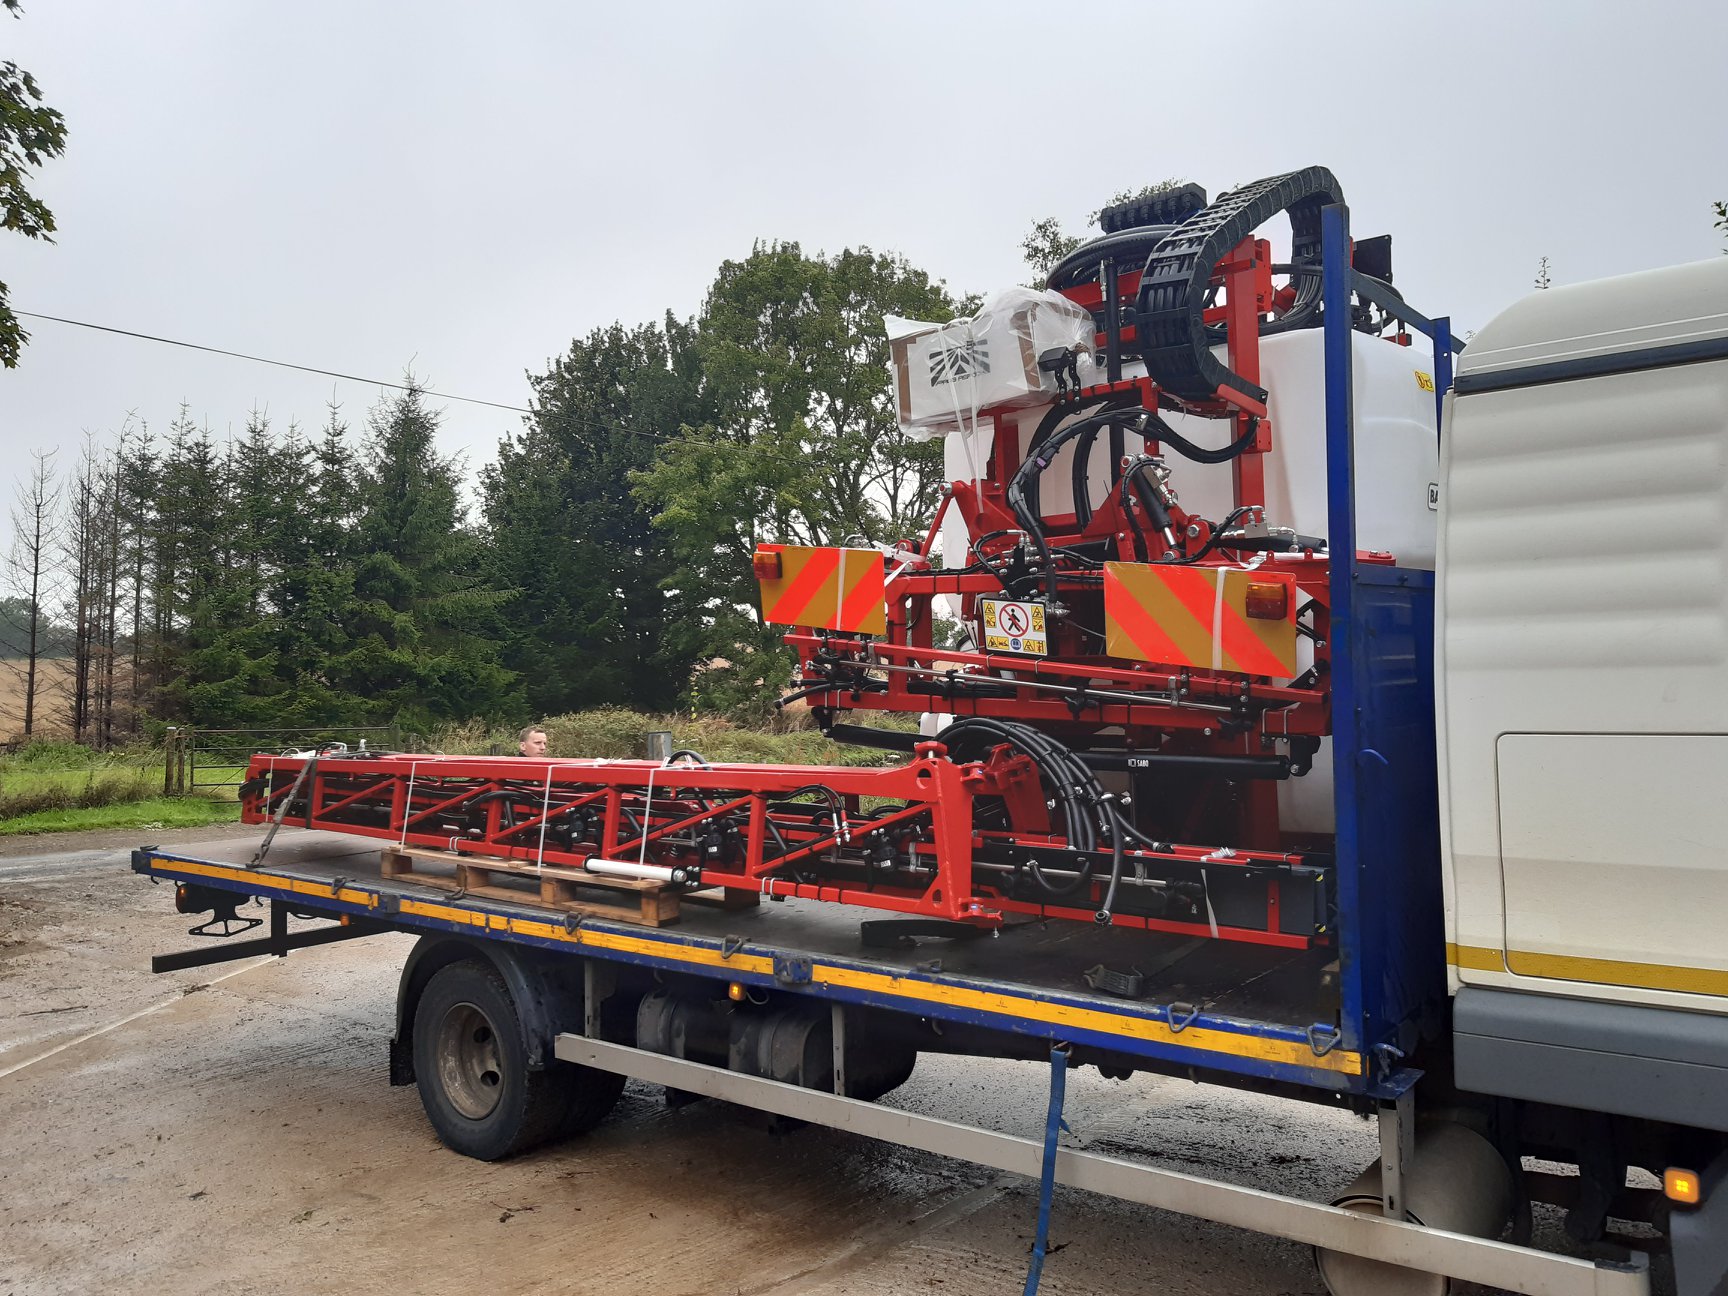 Delivery of the Bargam 1600 Super BLD